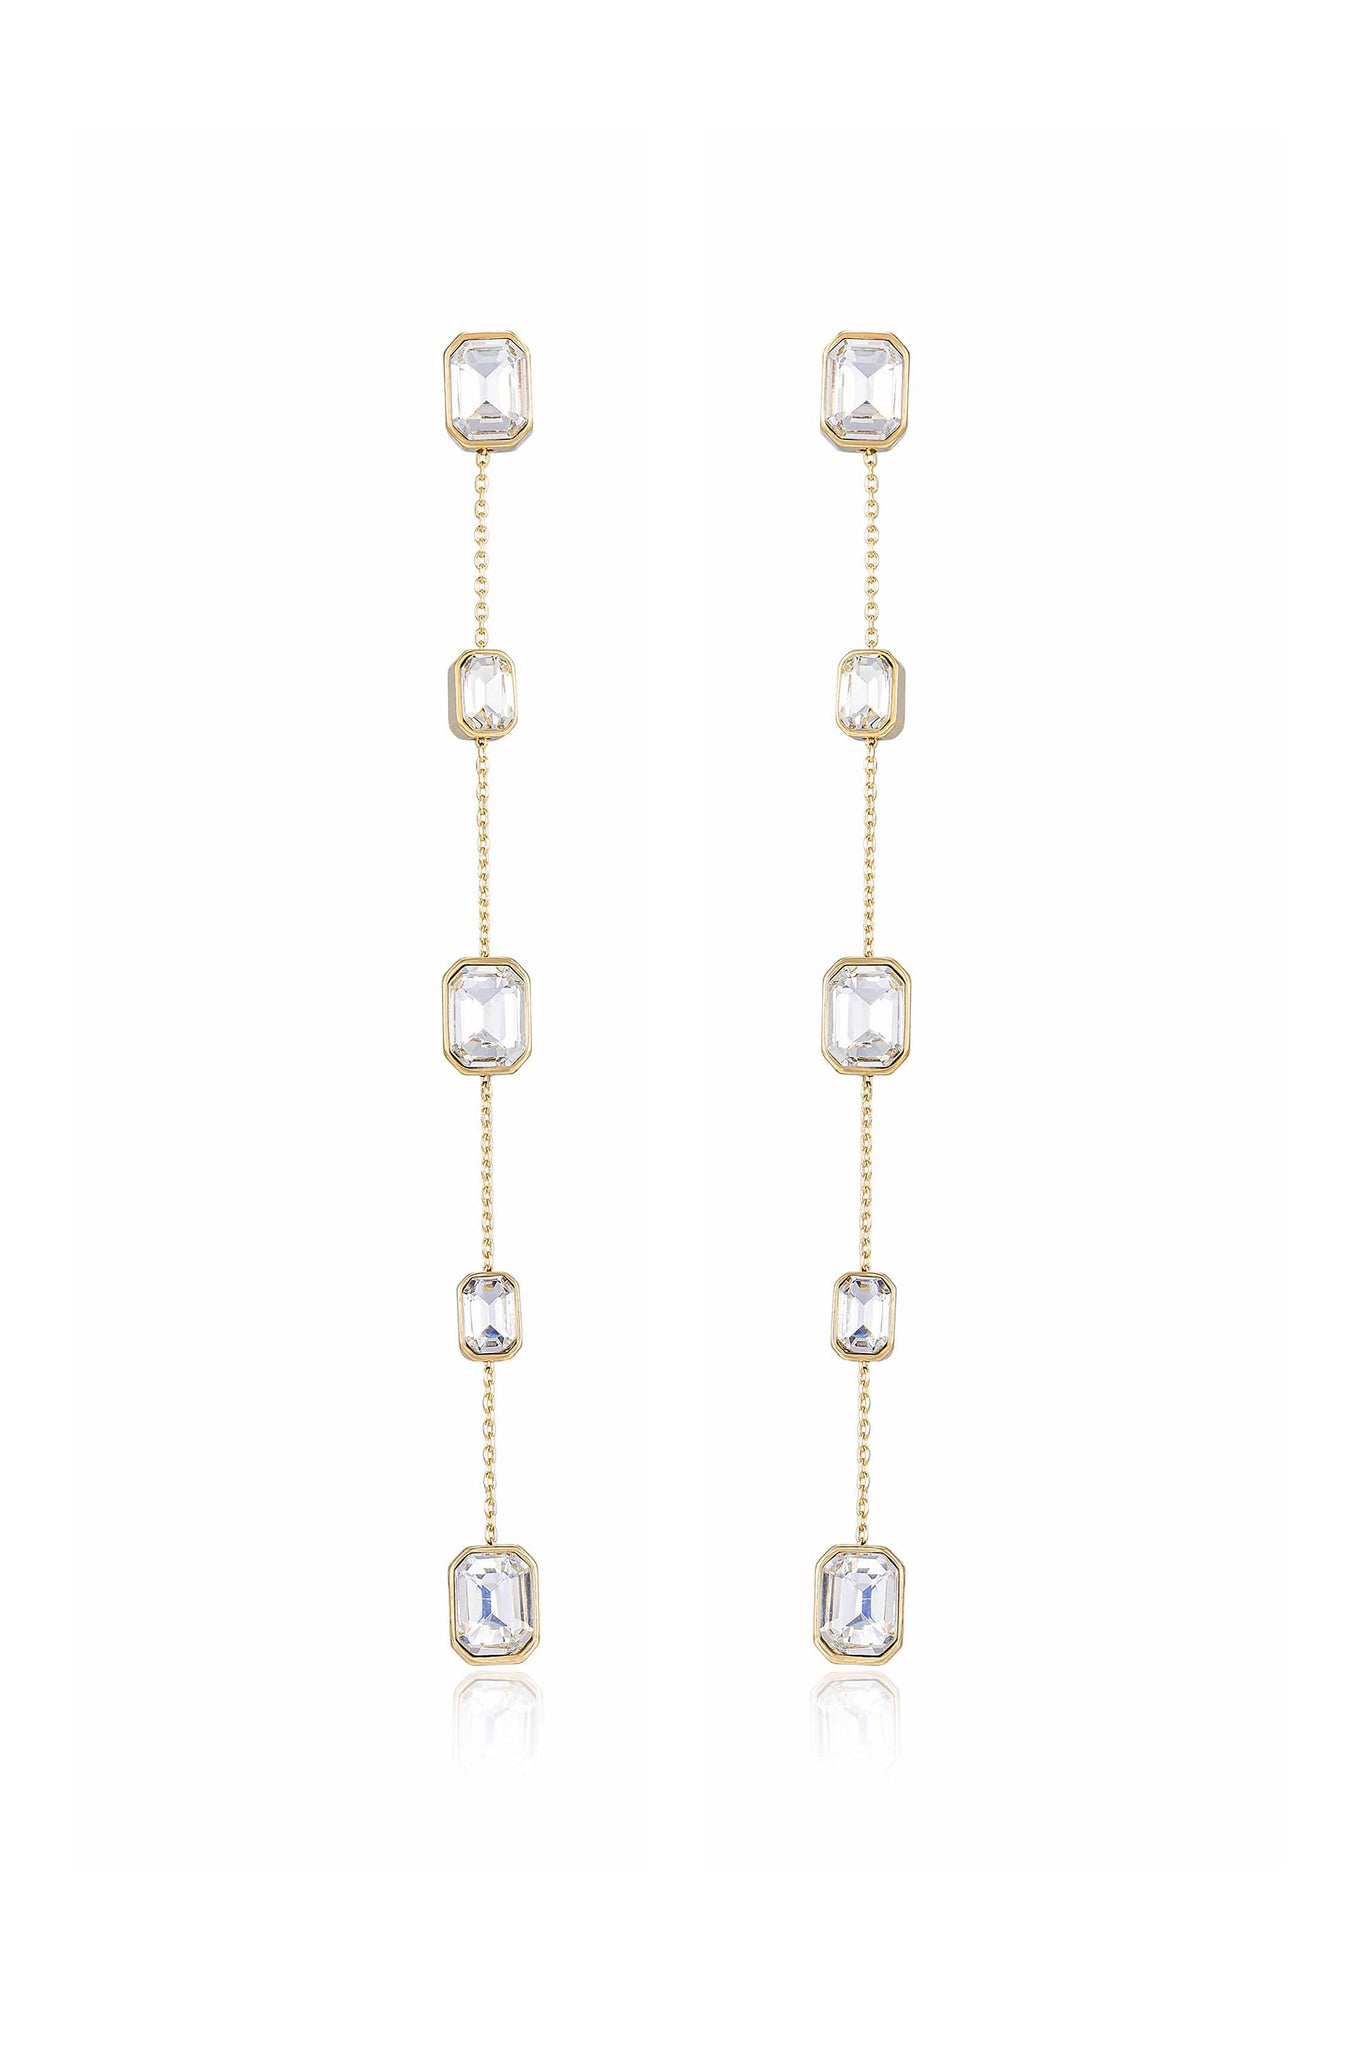 Iconic Crystal Dangle Earrings in clear crystals